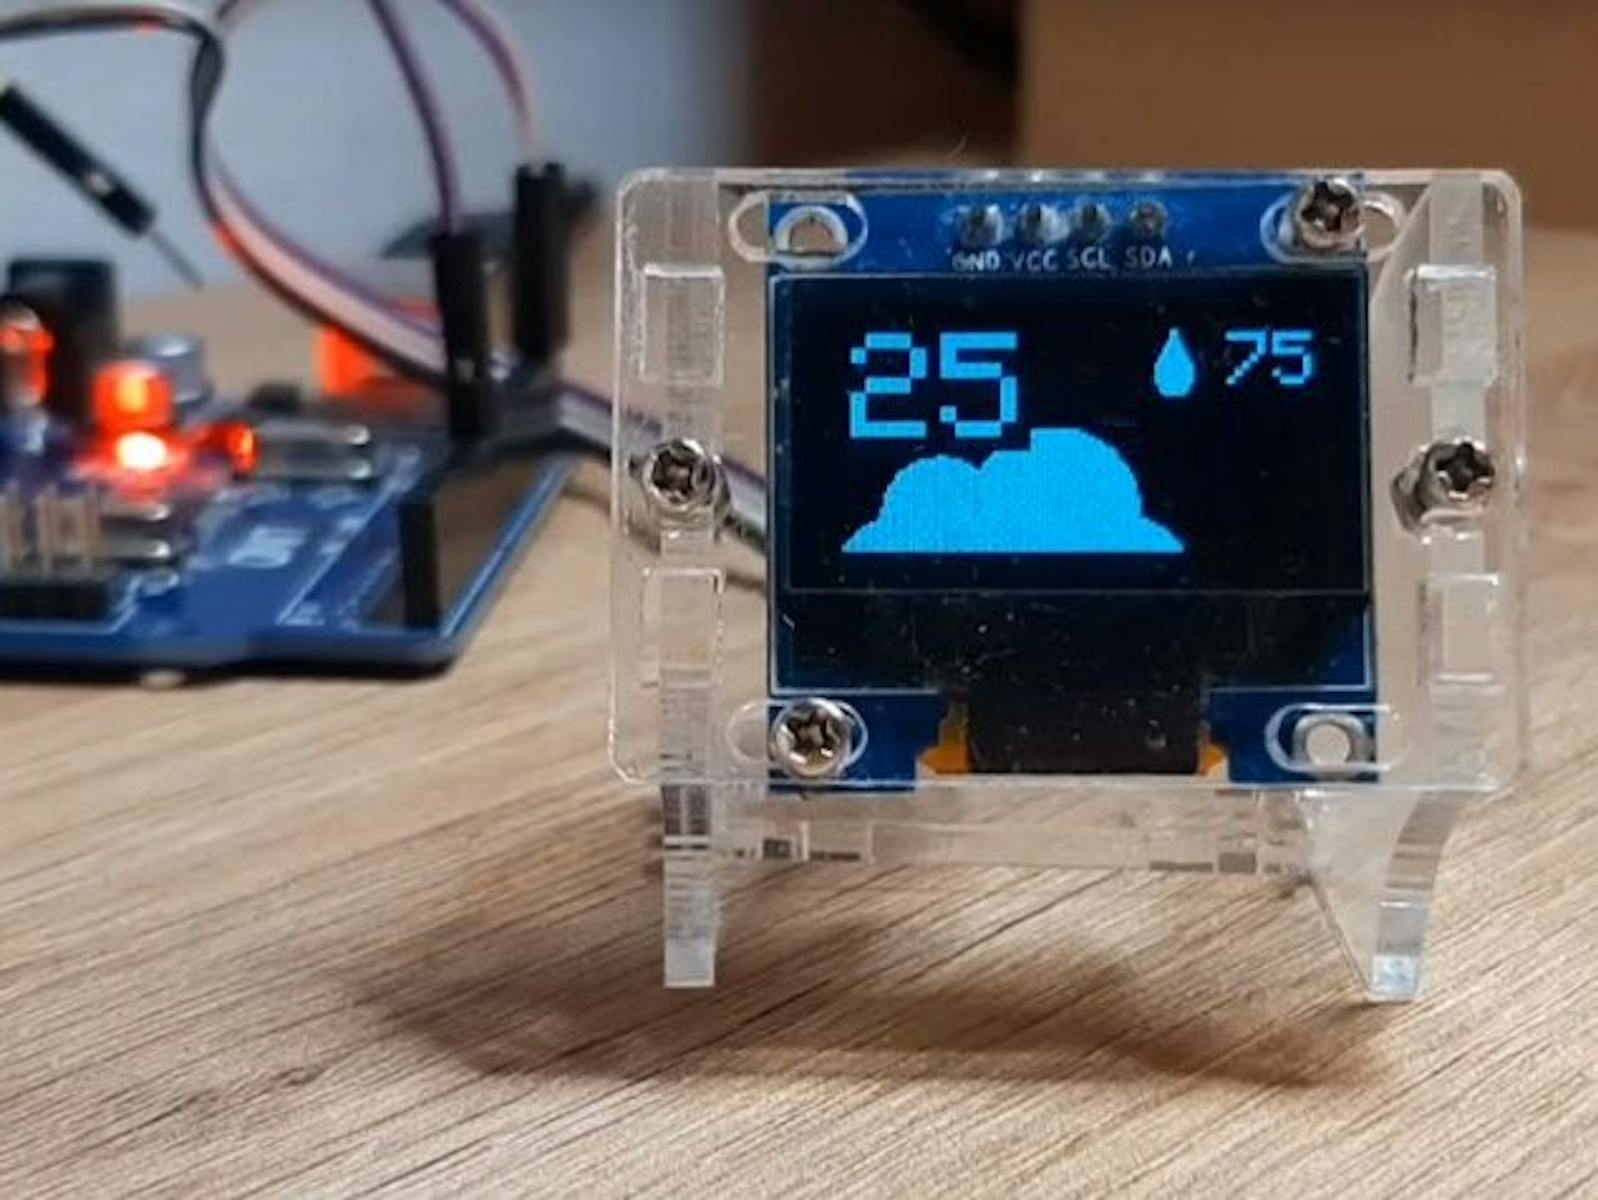 Simple Diy Weather Station With Dht11 And Oled Display 7068